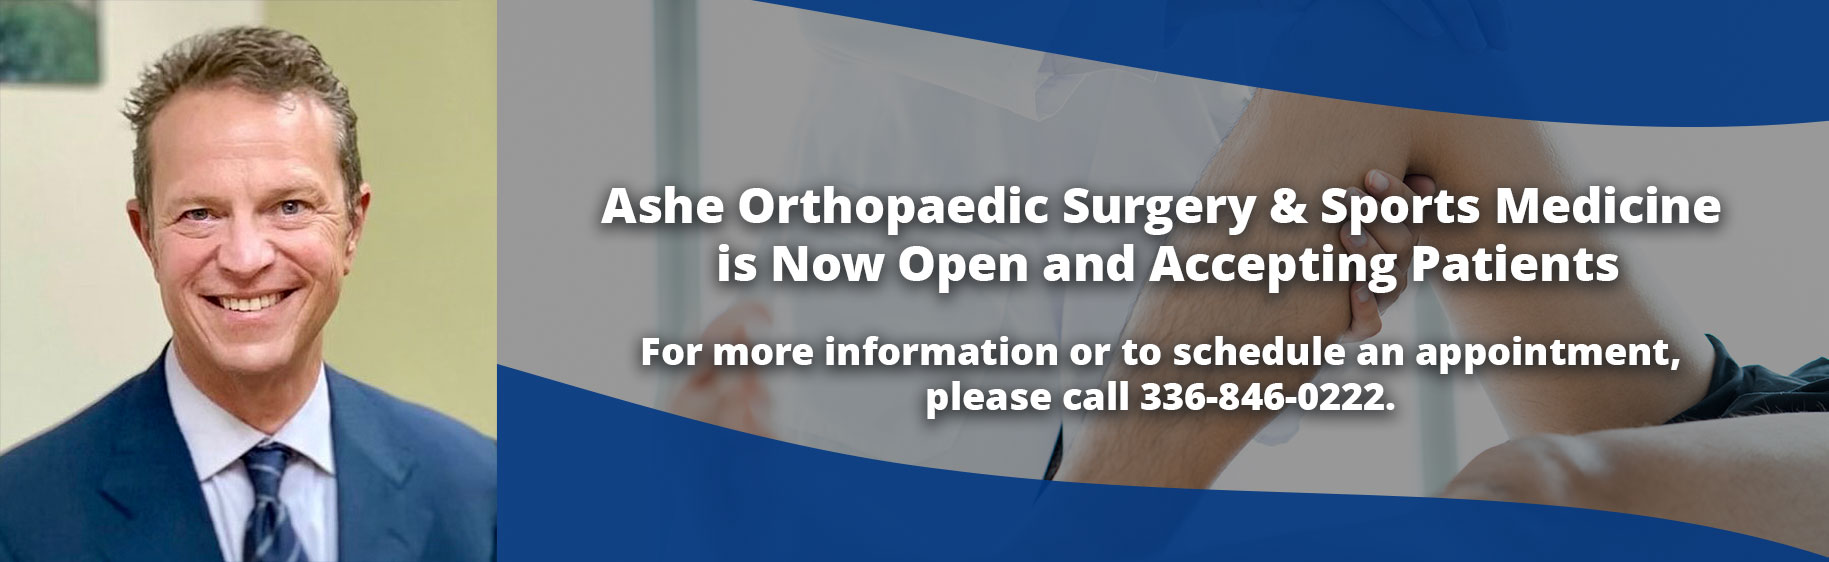 Ashe Orthopaedic Surgery & Sports Medicine is Now Open and Accepting Patients 

For more information or to schedule an appointment, please call 336-846-0222.